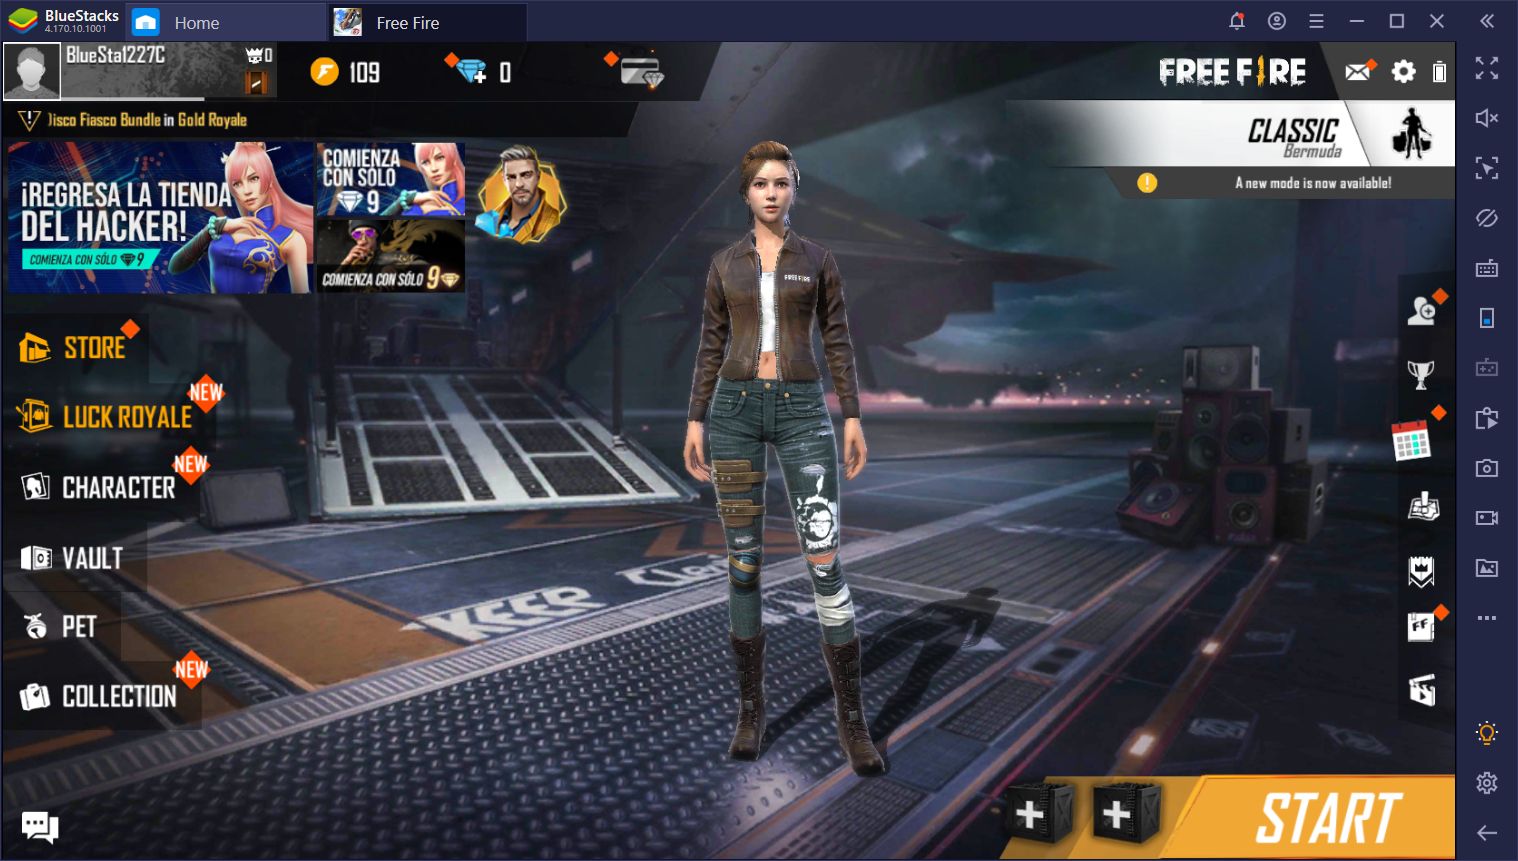 5 Best Characters in Free Fire Game in 2020 | BlueStacks